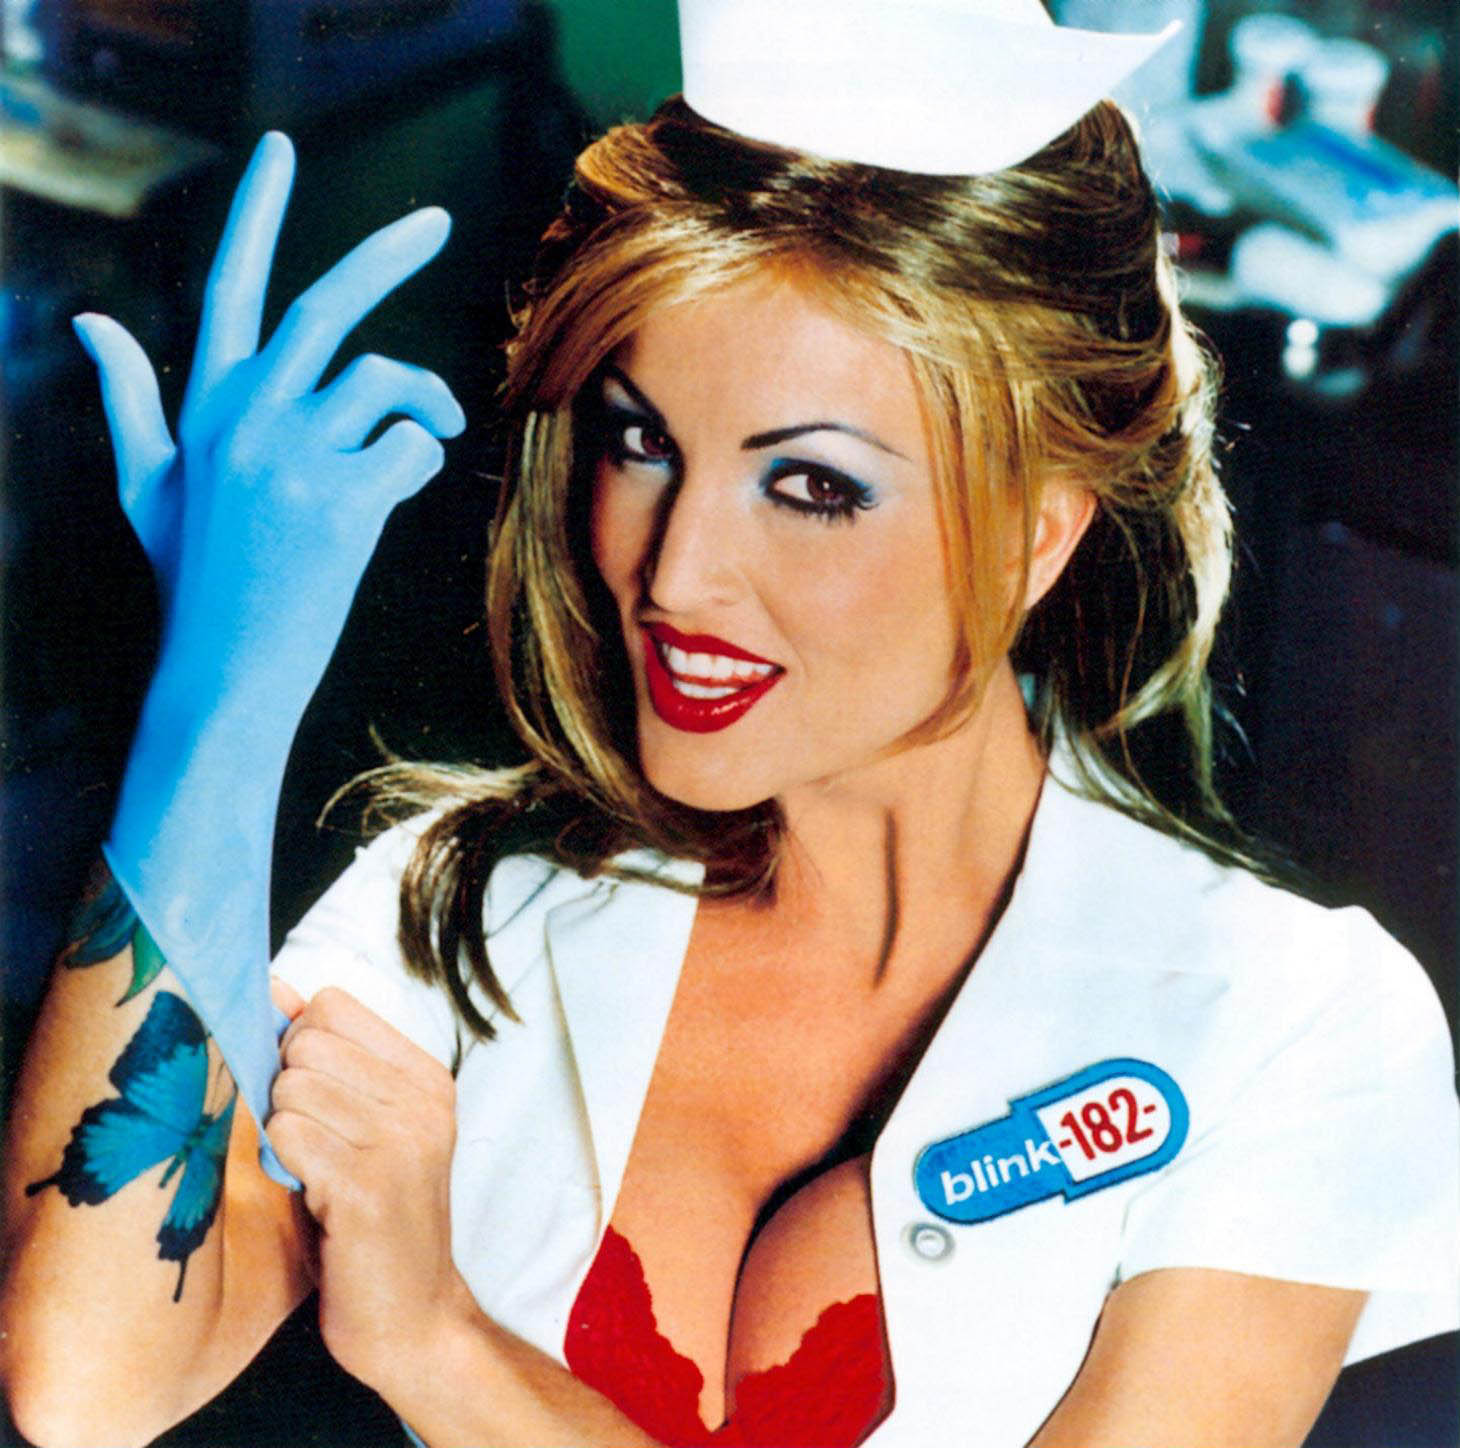 27881814_Blink-182 - Enema Of The State